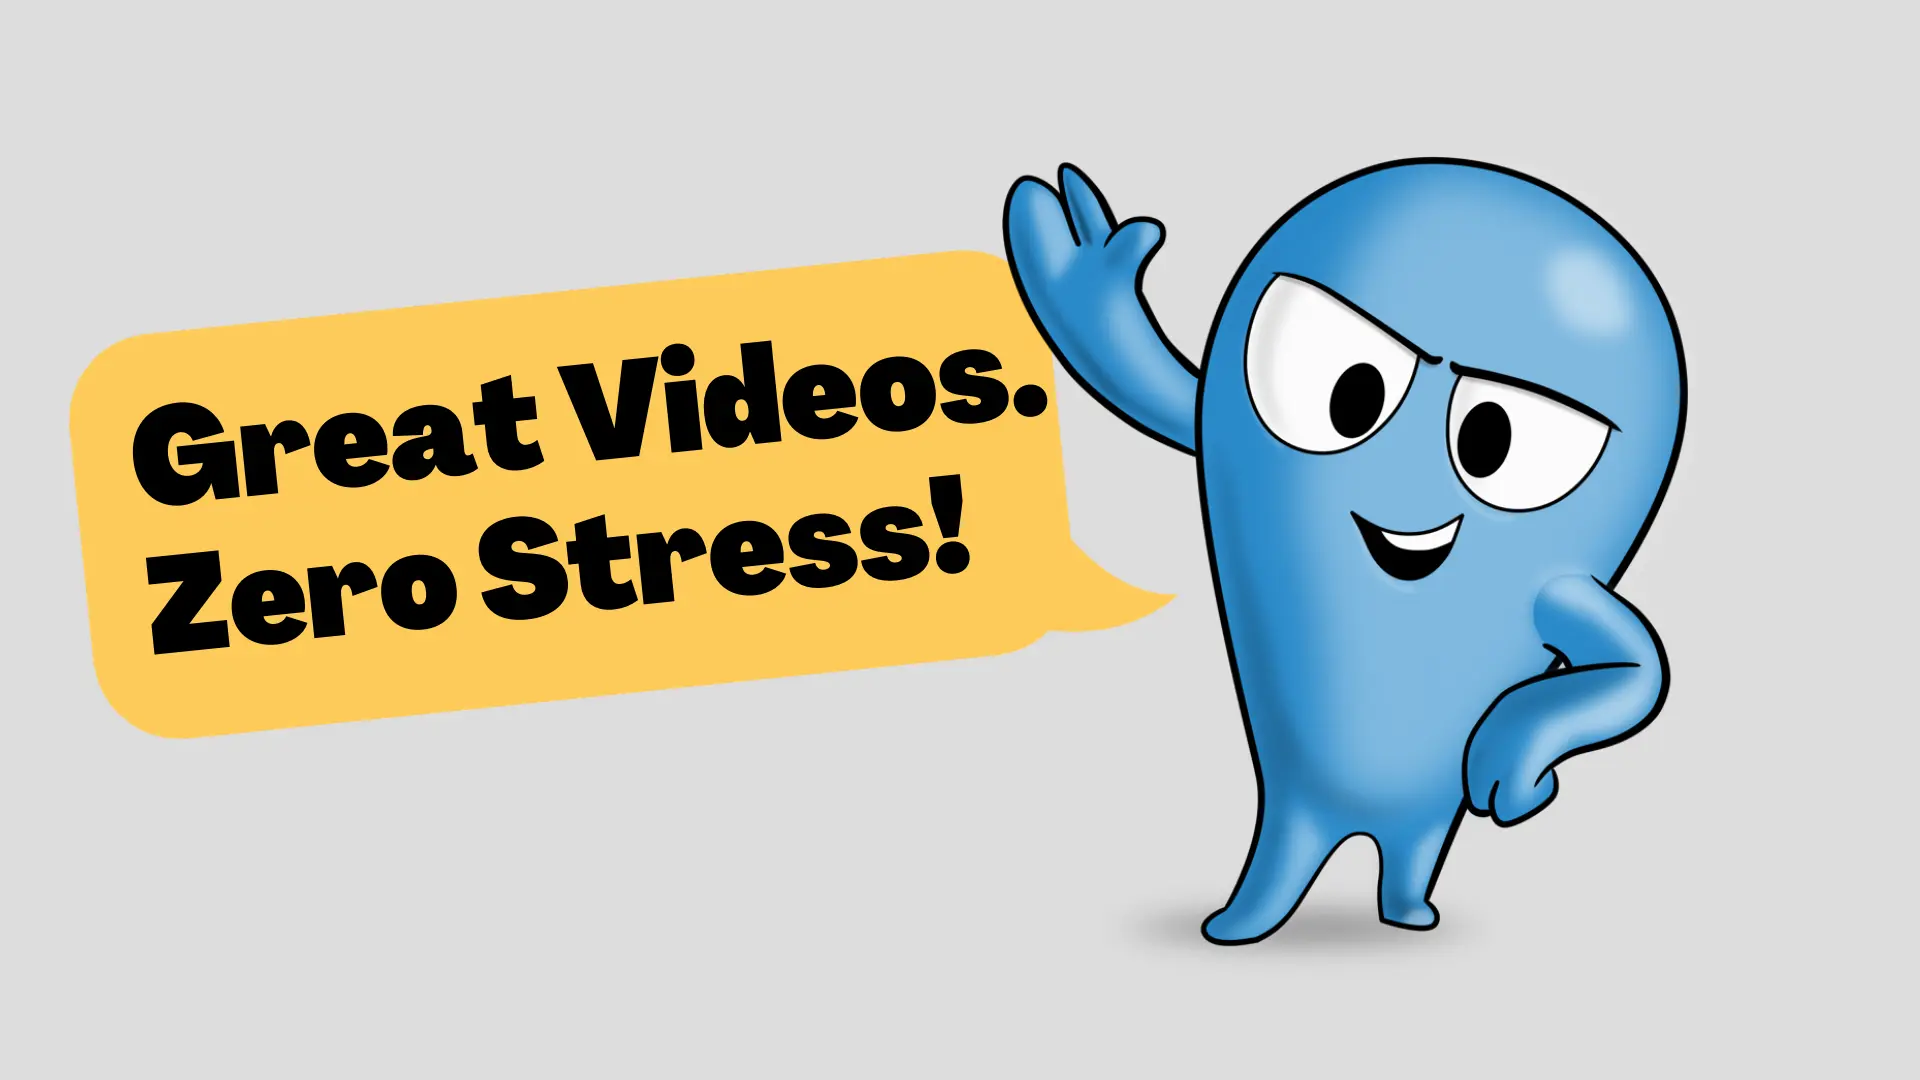 Use our online video editor ChopChop to create great videos with zero stress